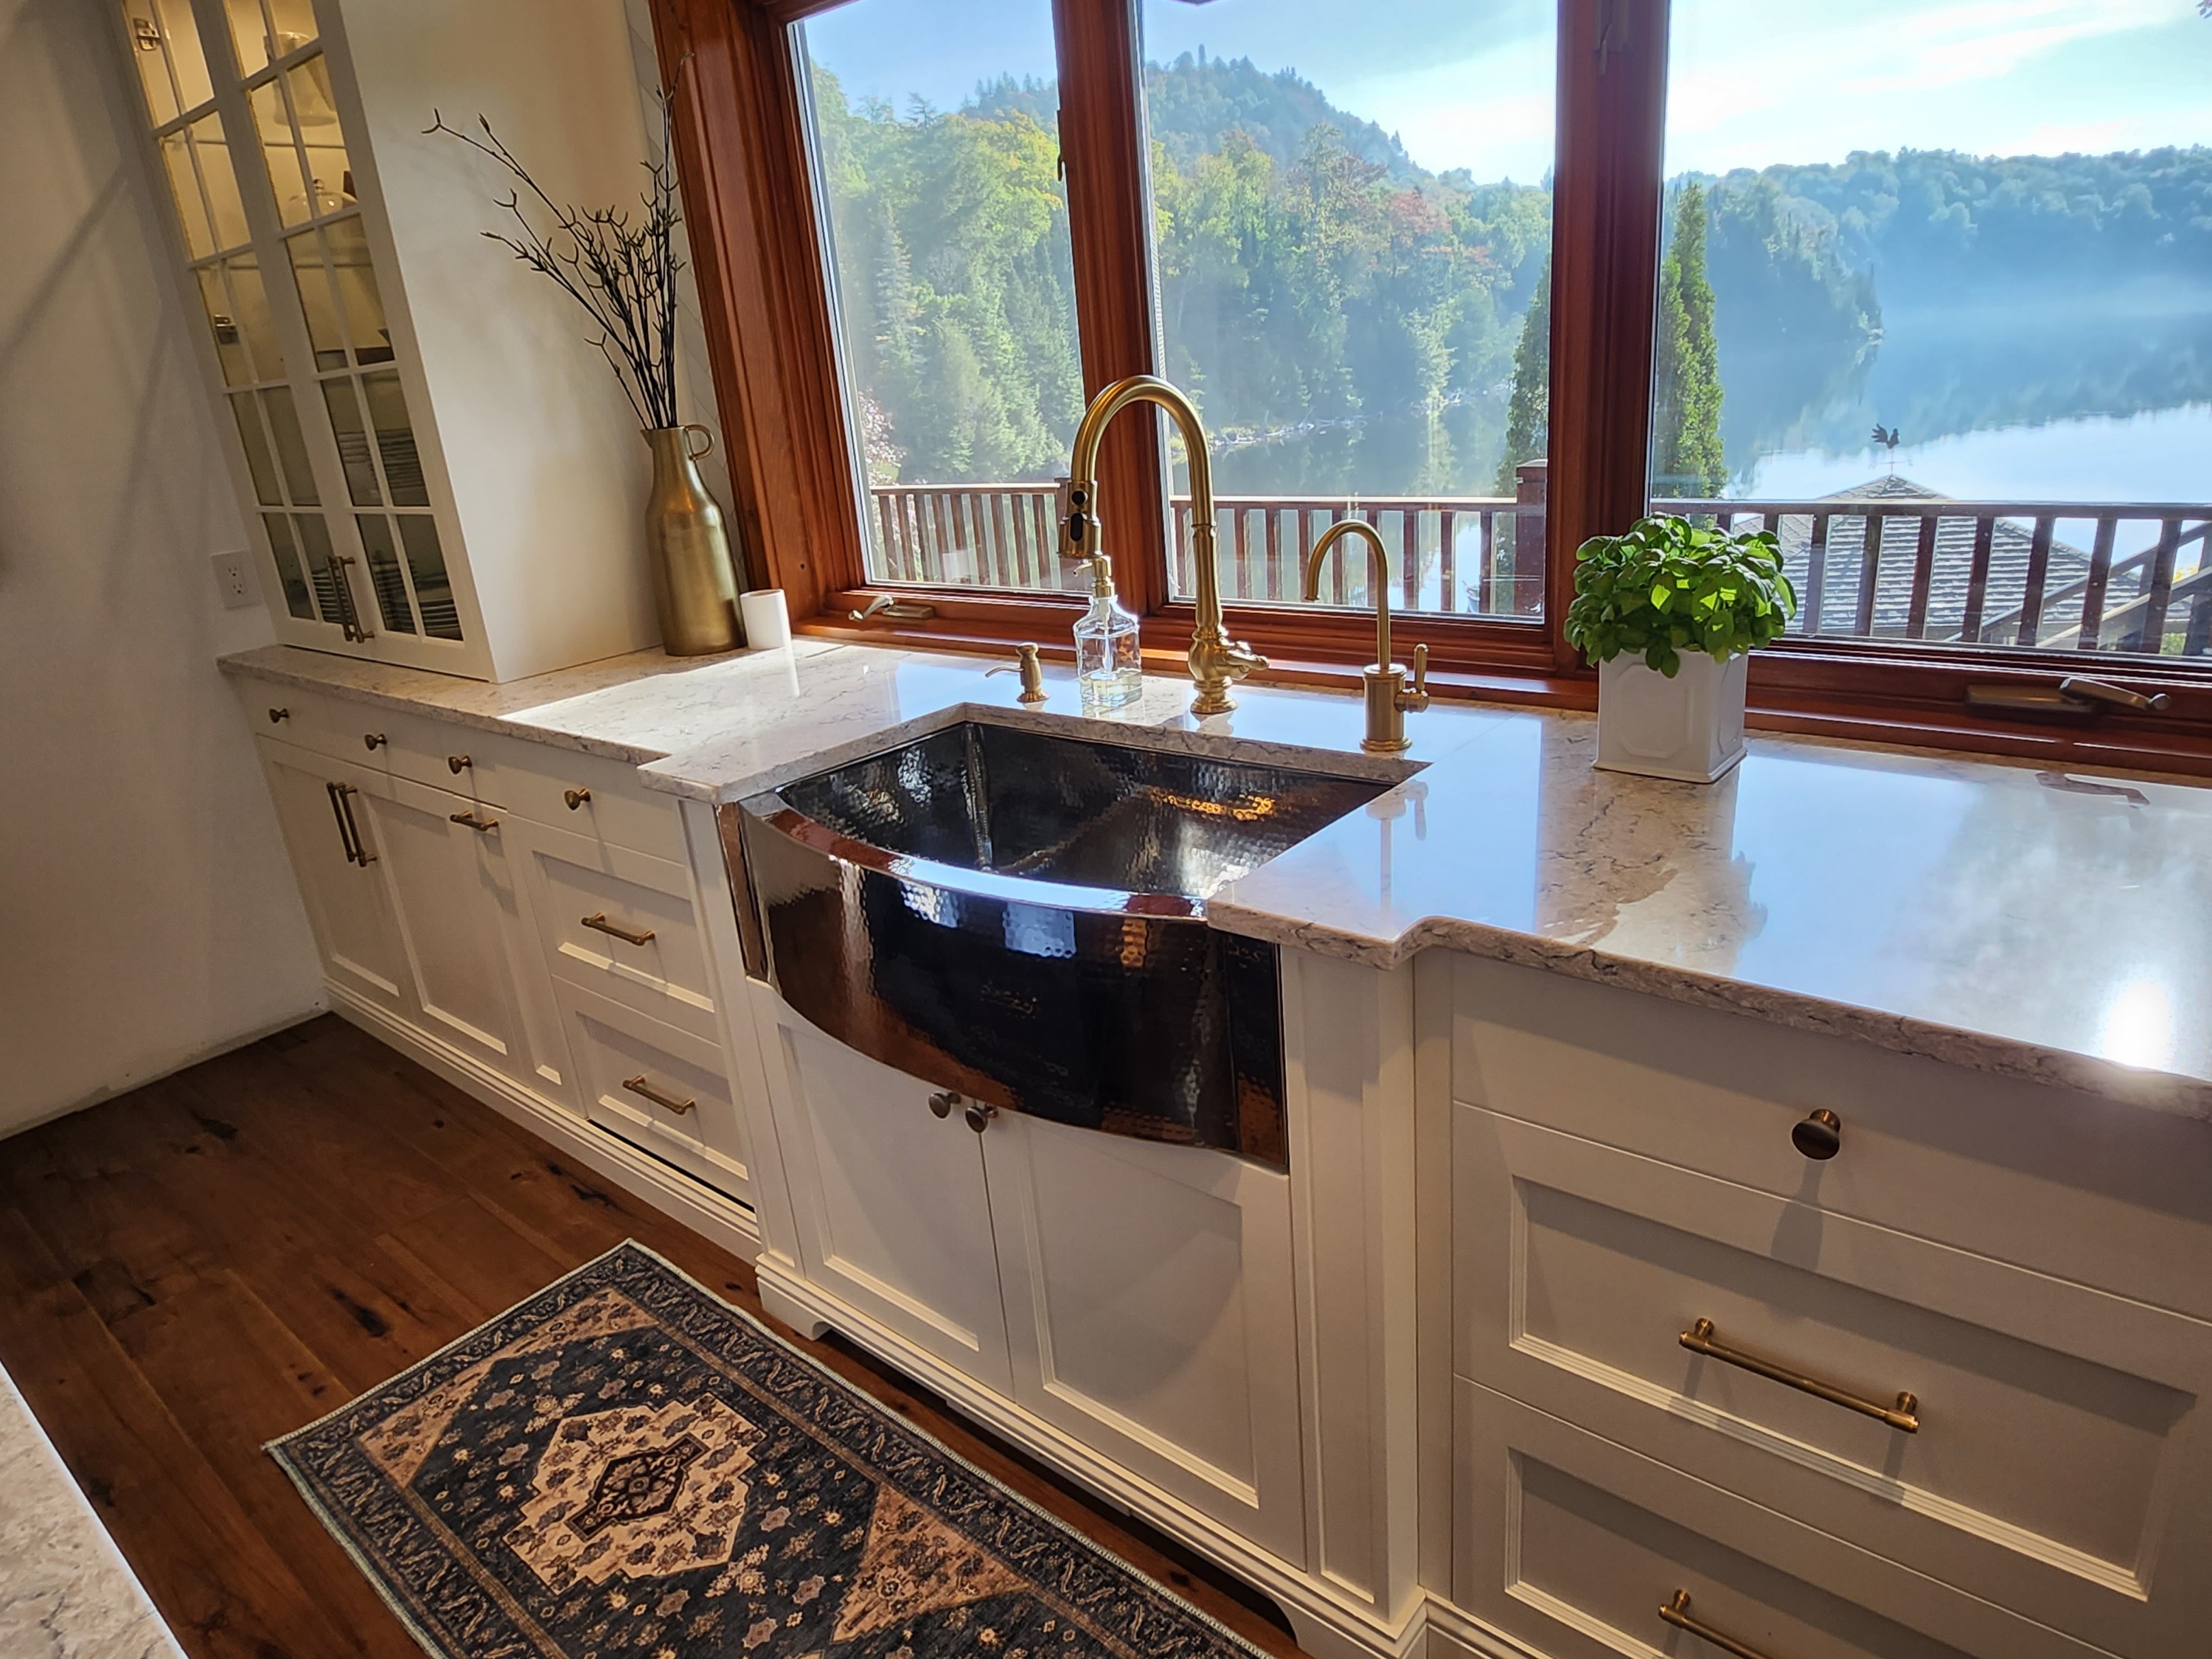 CopperSmith Semi Convex SB Sink Polished Stainless Steel Hand Hammered in a classic style kitchen with marble countertops and white cabinets